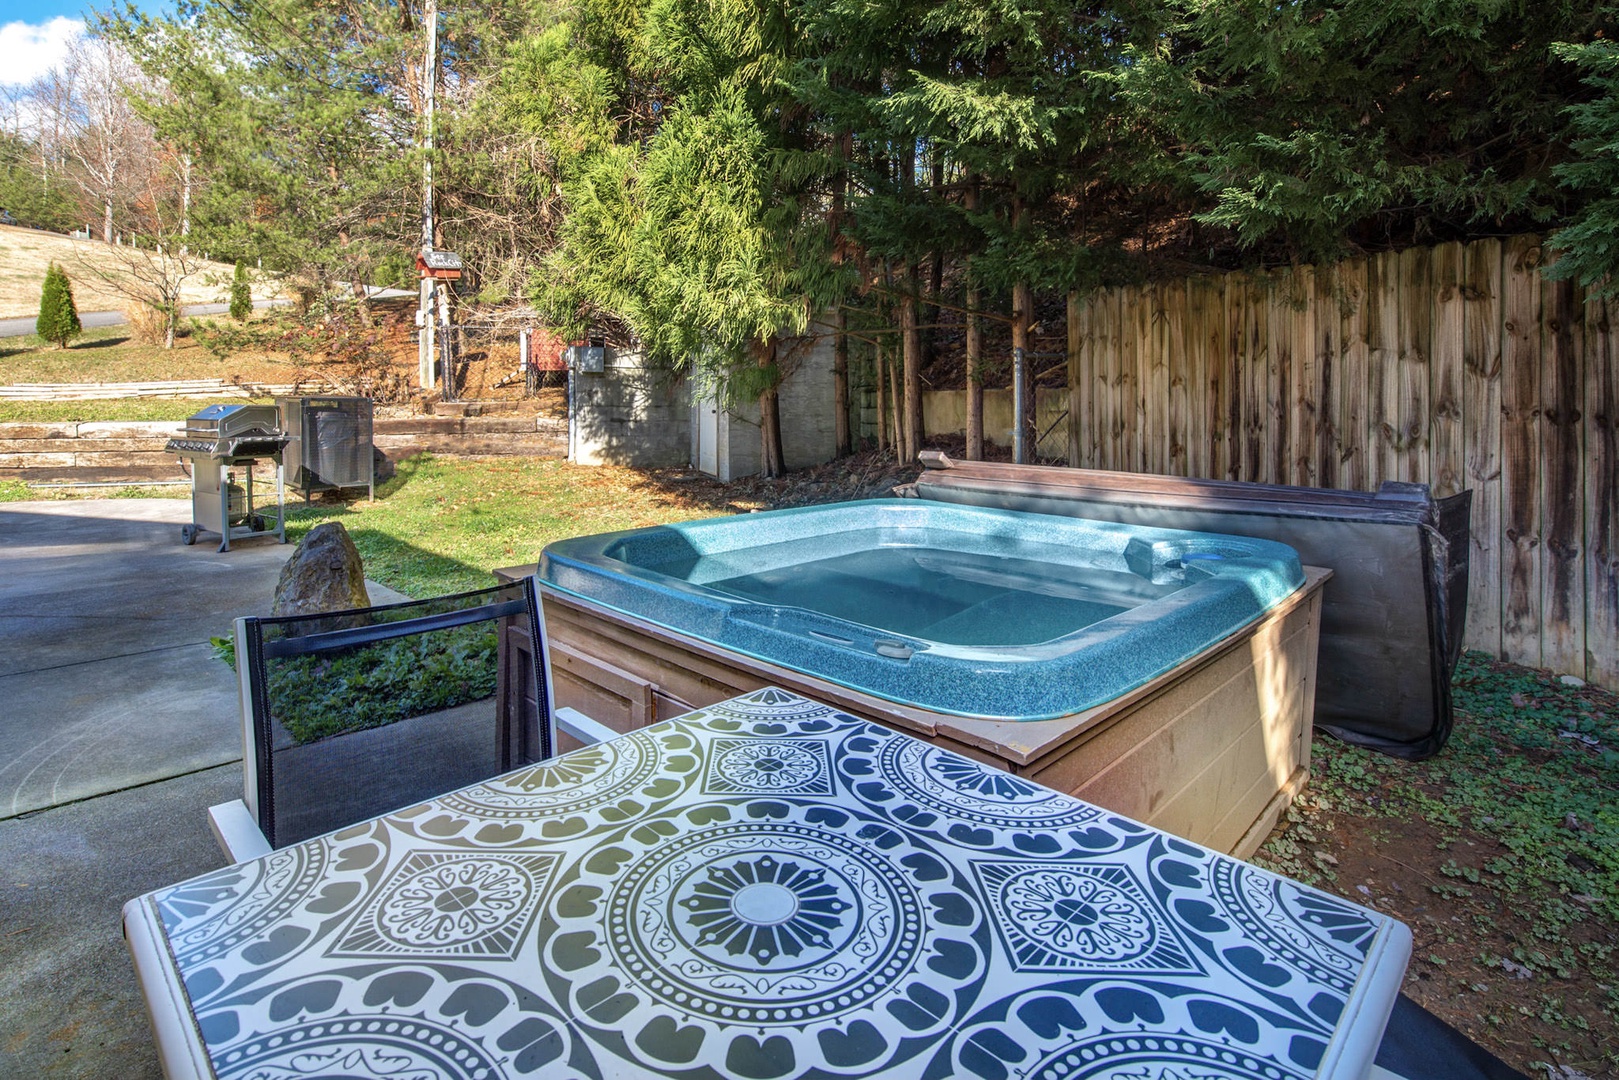 Hot tub with outdoor seating